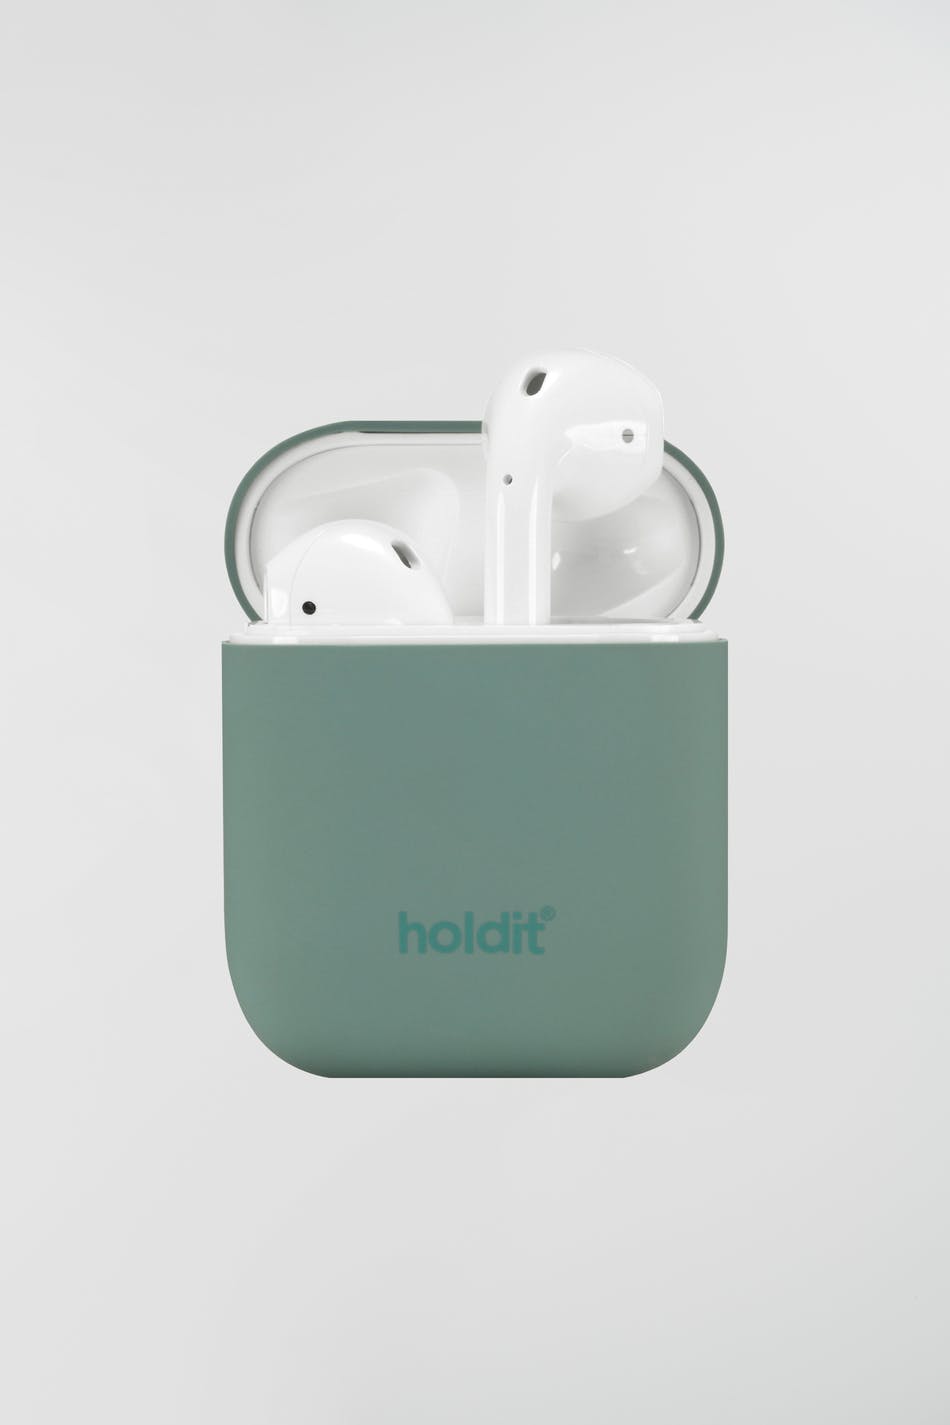 Holdit airpods silicone case